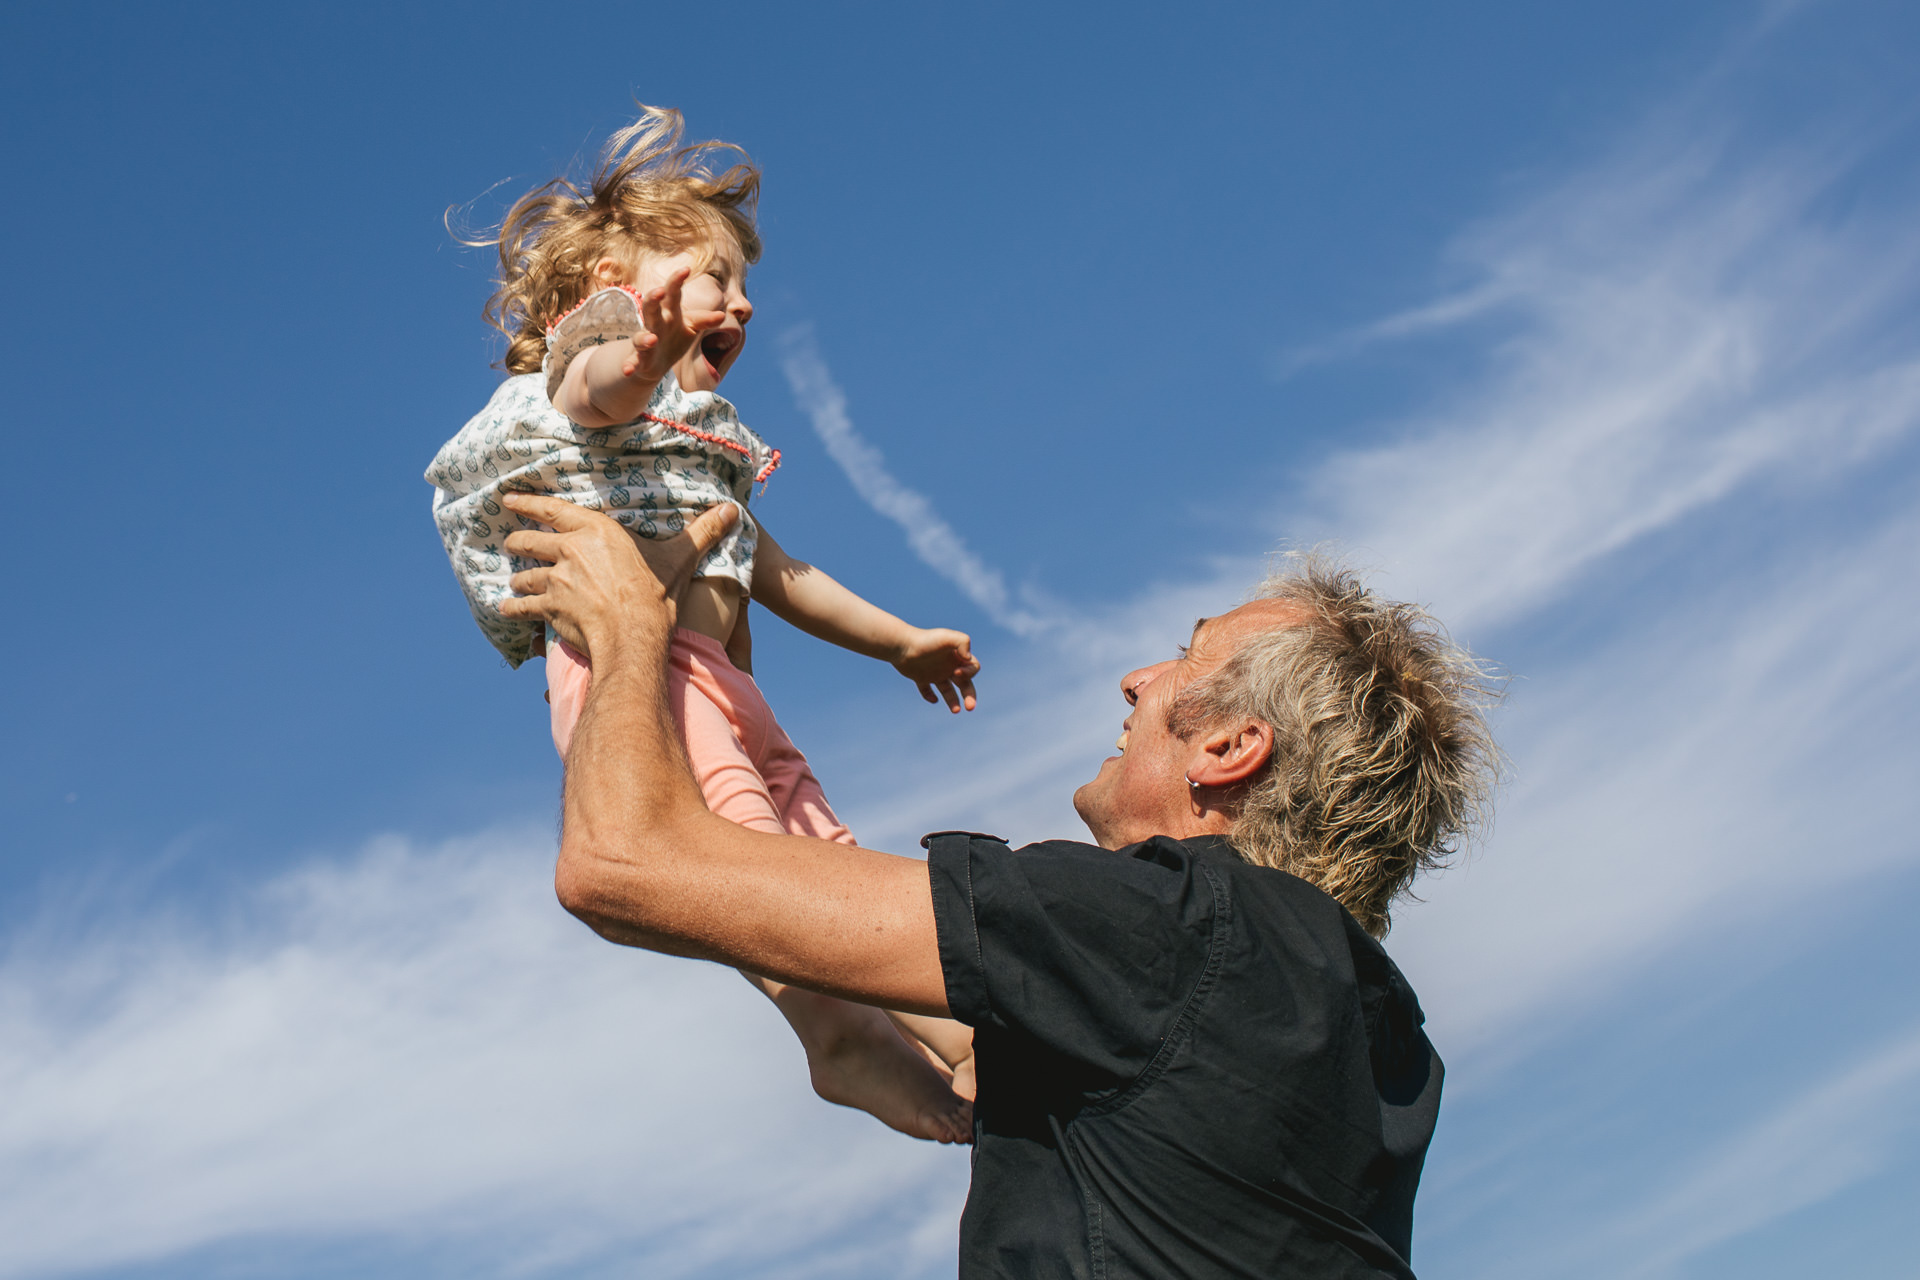 A dad throwing his small daughter up in the air